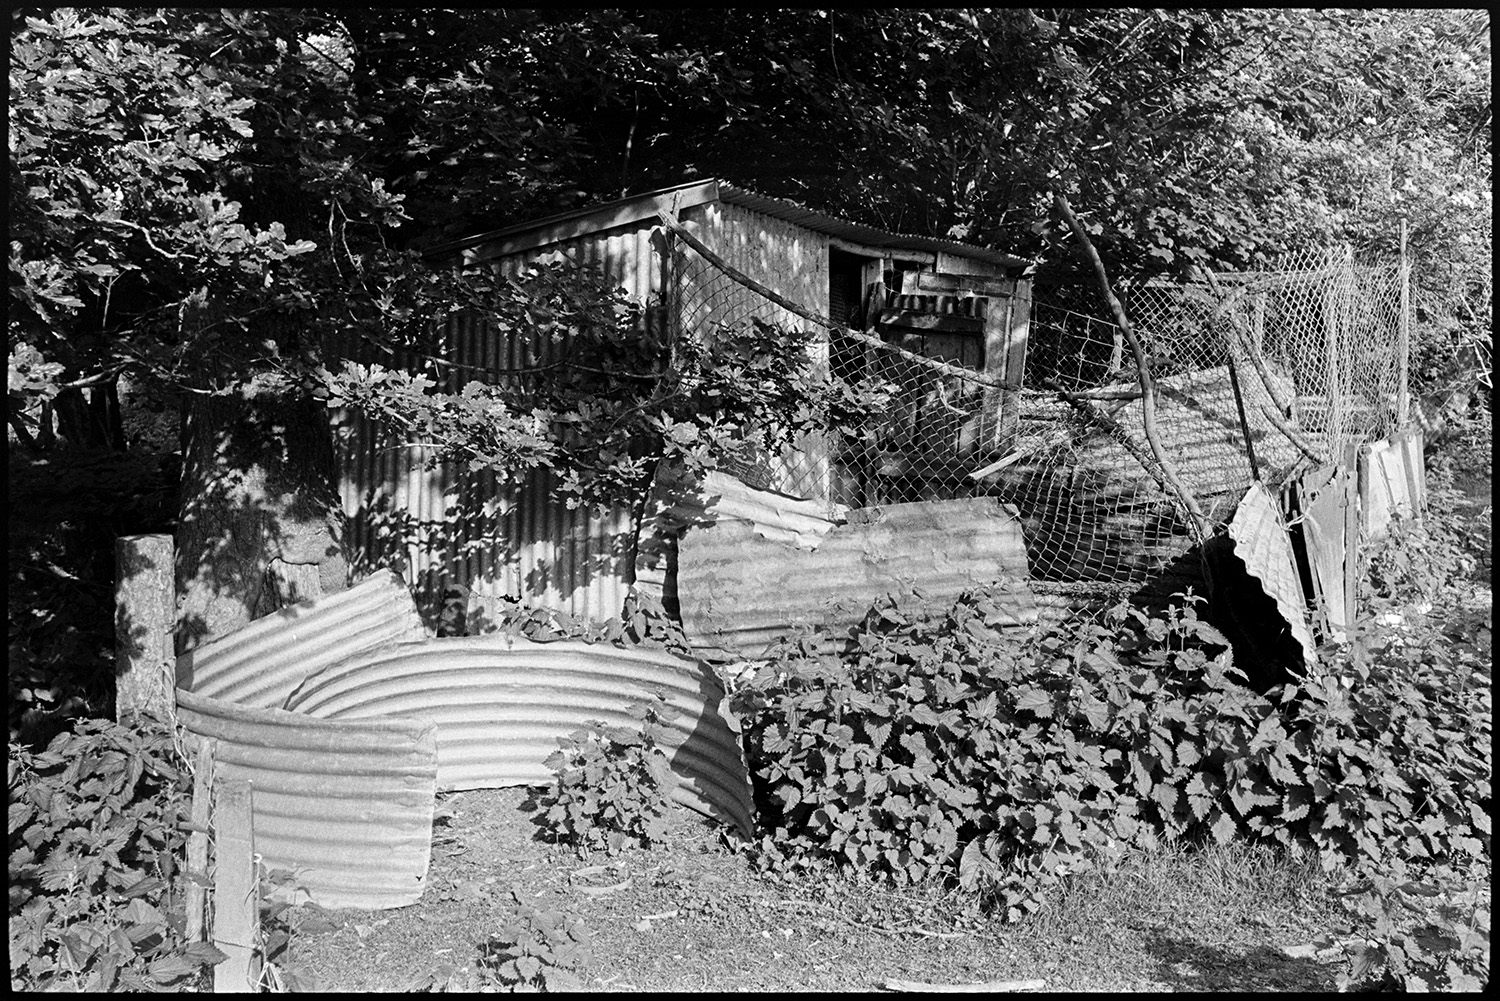 Corrugated iron sheds for dogs. 
[A corrugated iron shed with a fence under trees, for dogs at Millhams, Dolton. Other sheets of corrugated iron are around the fence.]